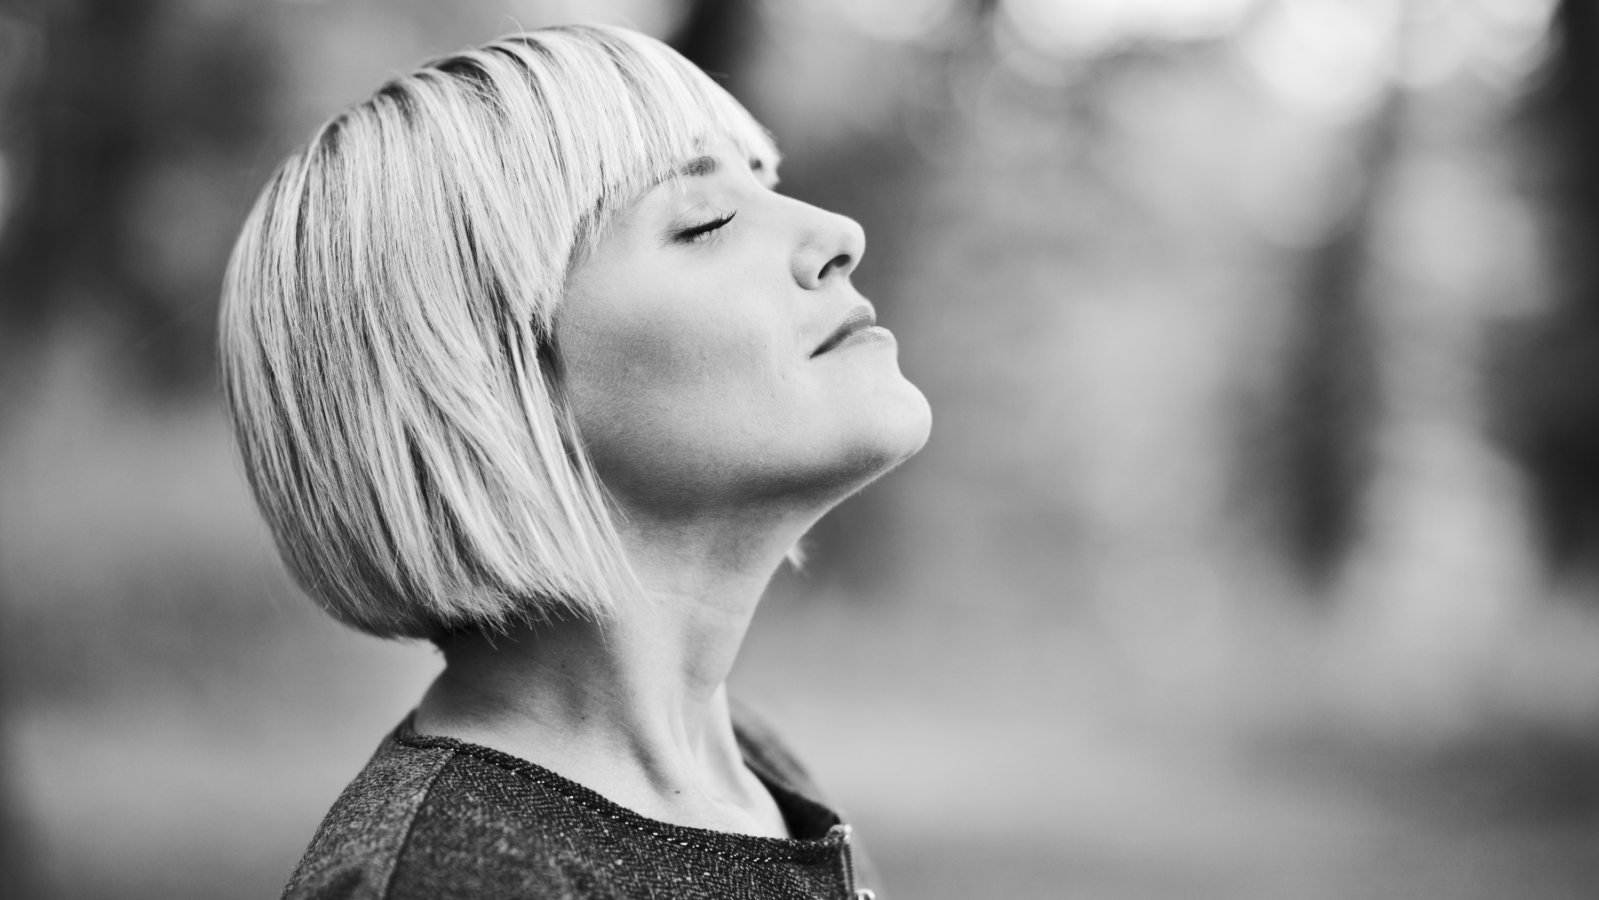 7 Breathing Basics for Better Focus, Increased Productivity and Overall Health